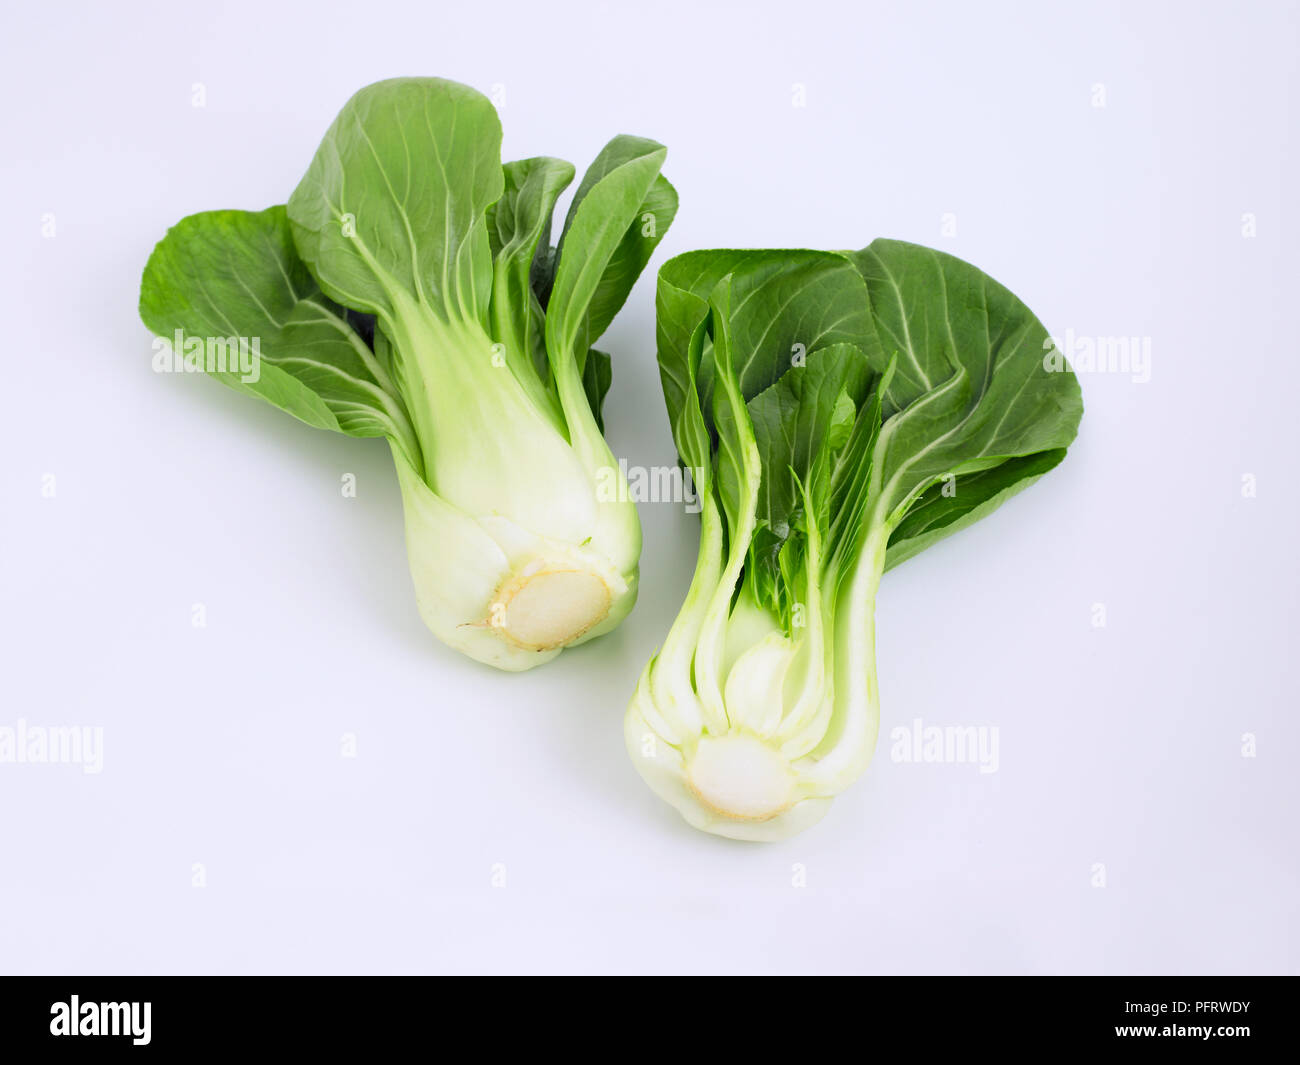 Chinese cabbage or Bok Choy (Brassica rapa) Stock Photo